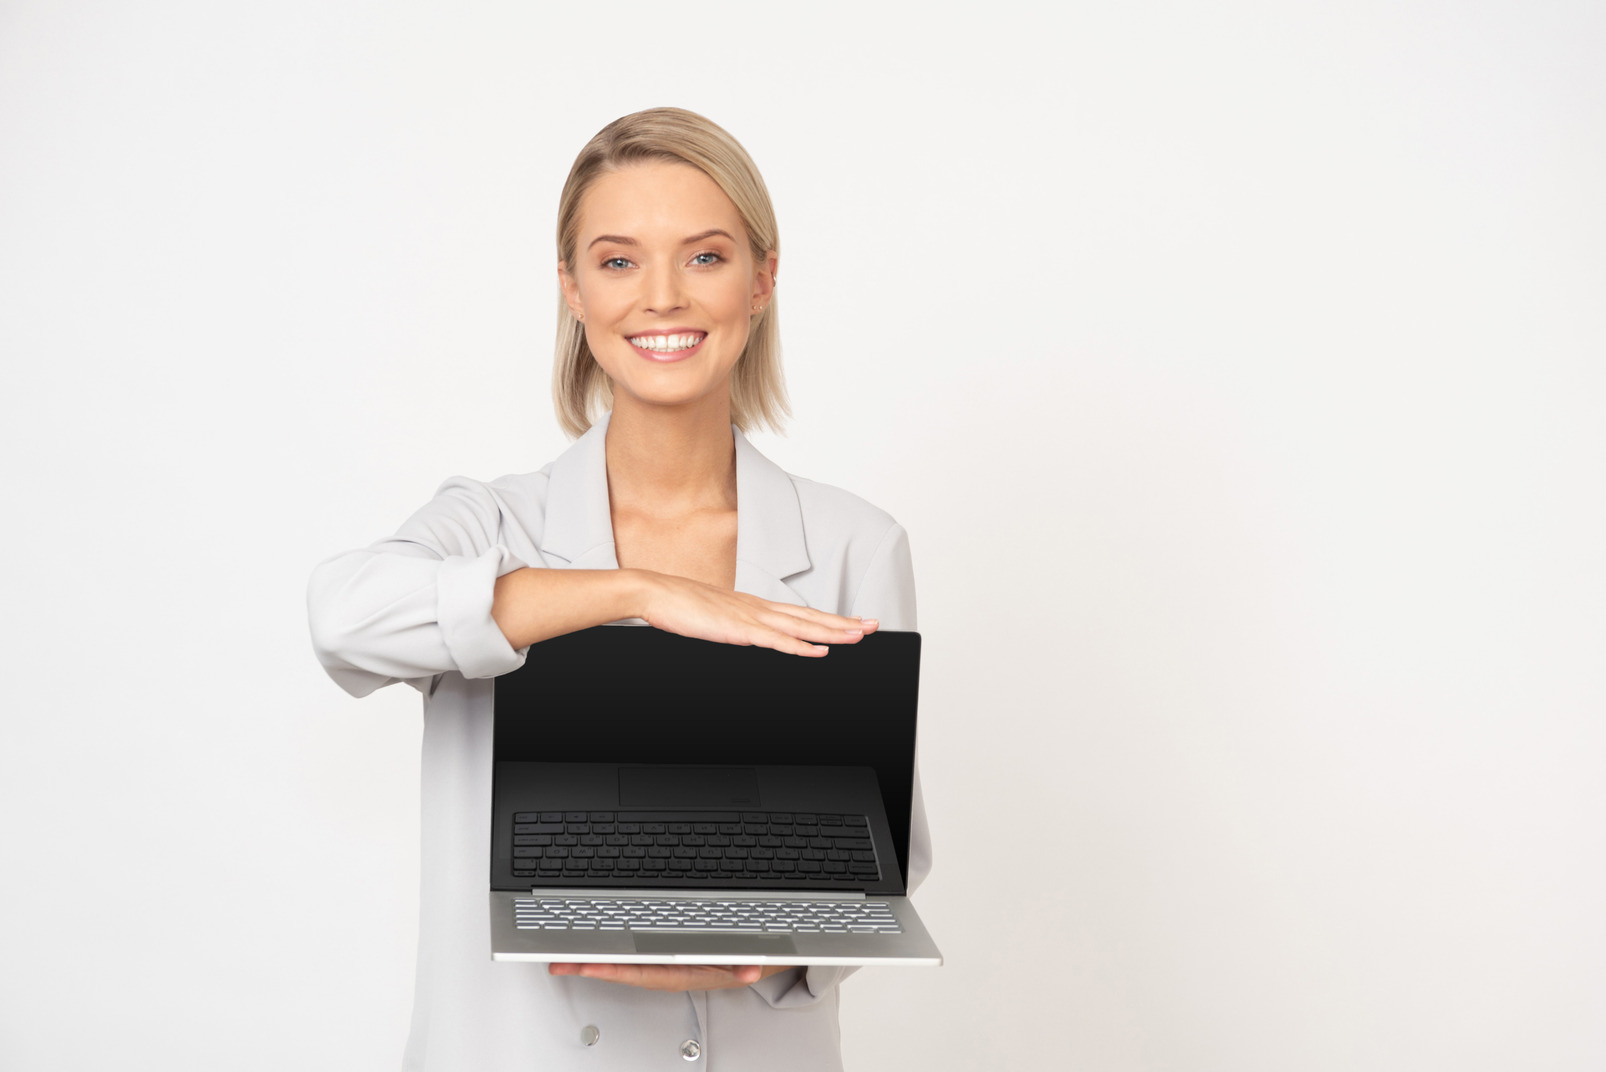 Young businesswoman showing her laptop